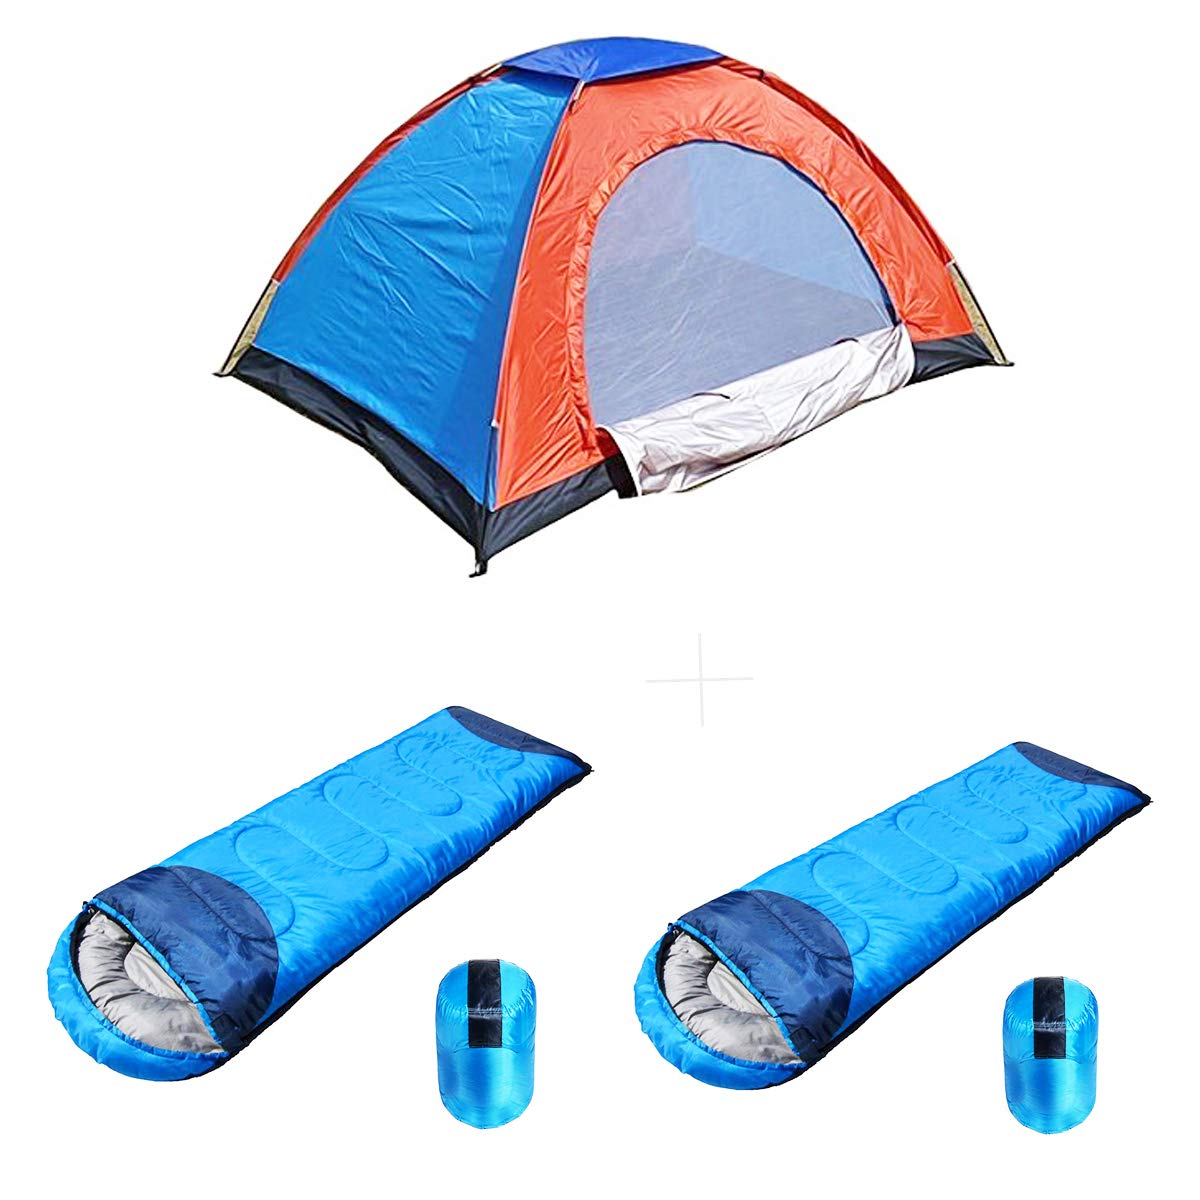 With a foldable tent (เต้นท์พับได้) you can set up your tent almost anywhere in the city post thumbnail image